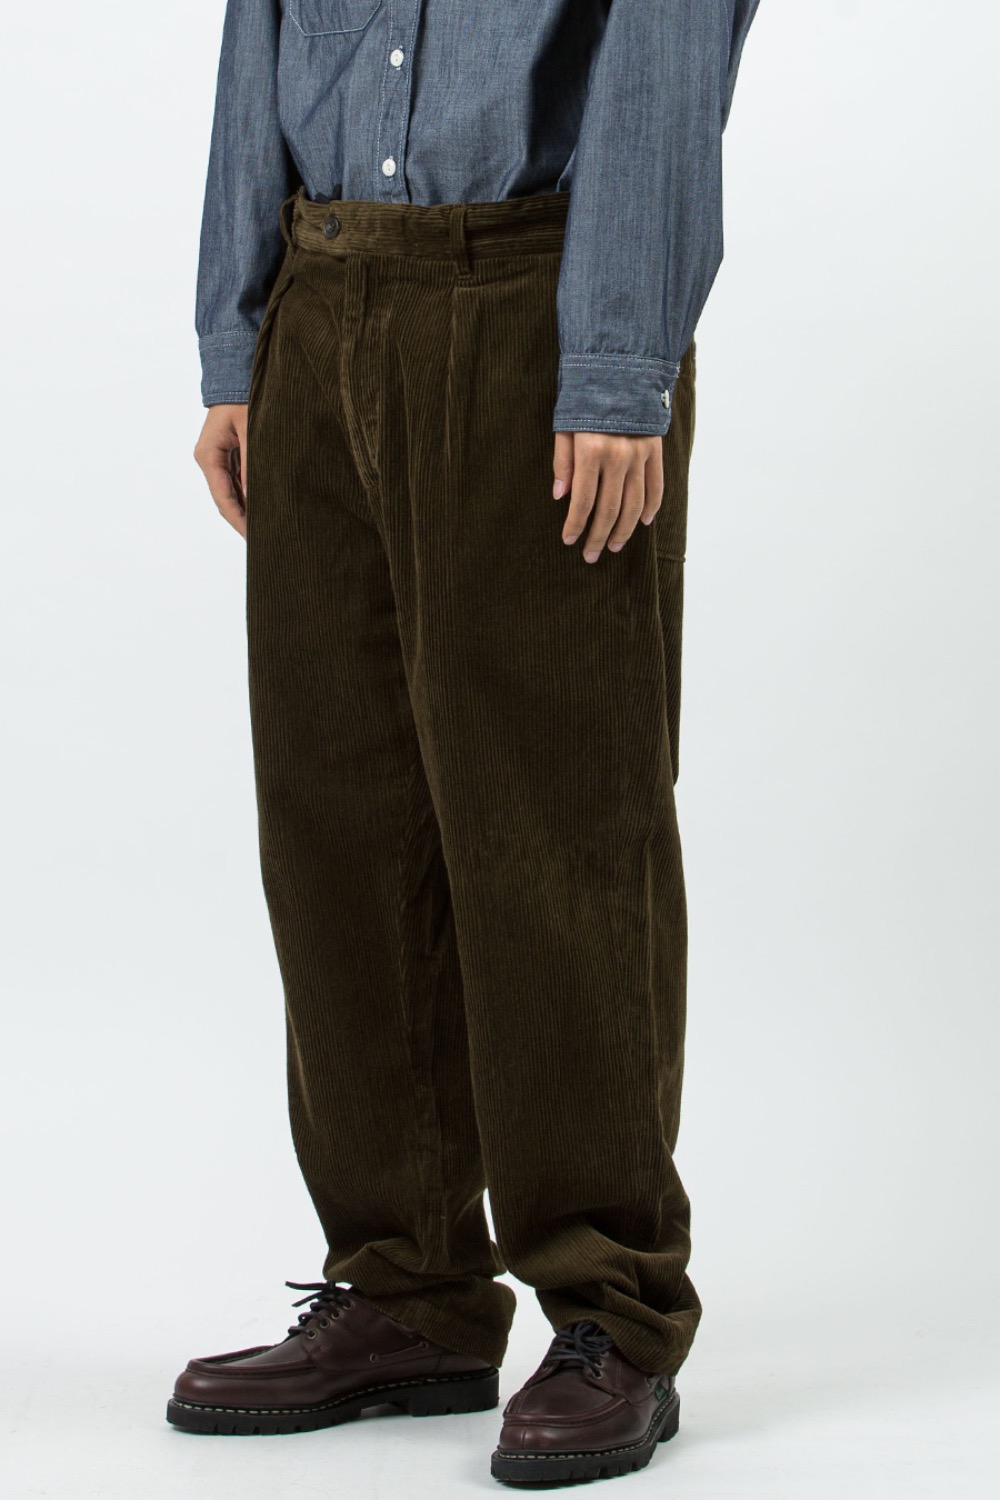 (23FW) CARLYLE PANT OLIVE COTTON 8W CORDUROY